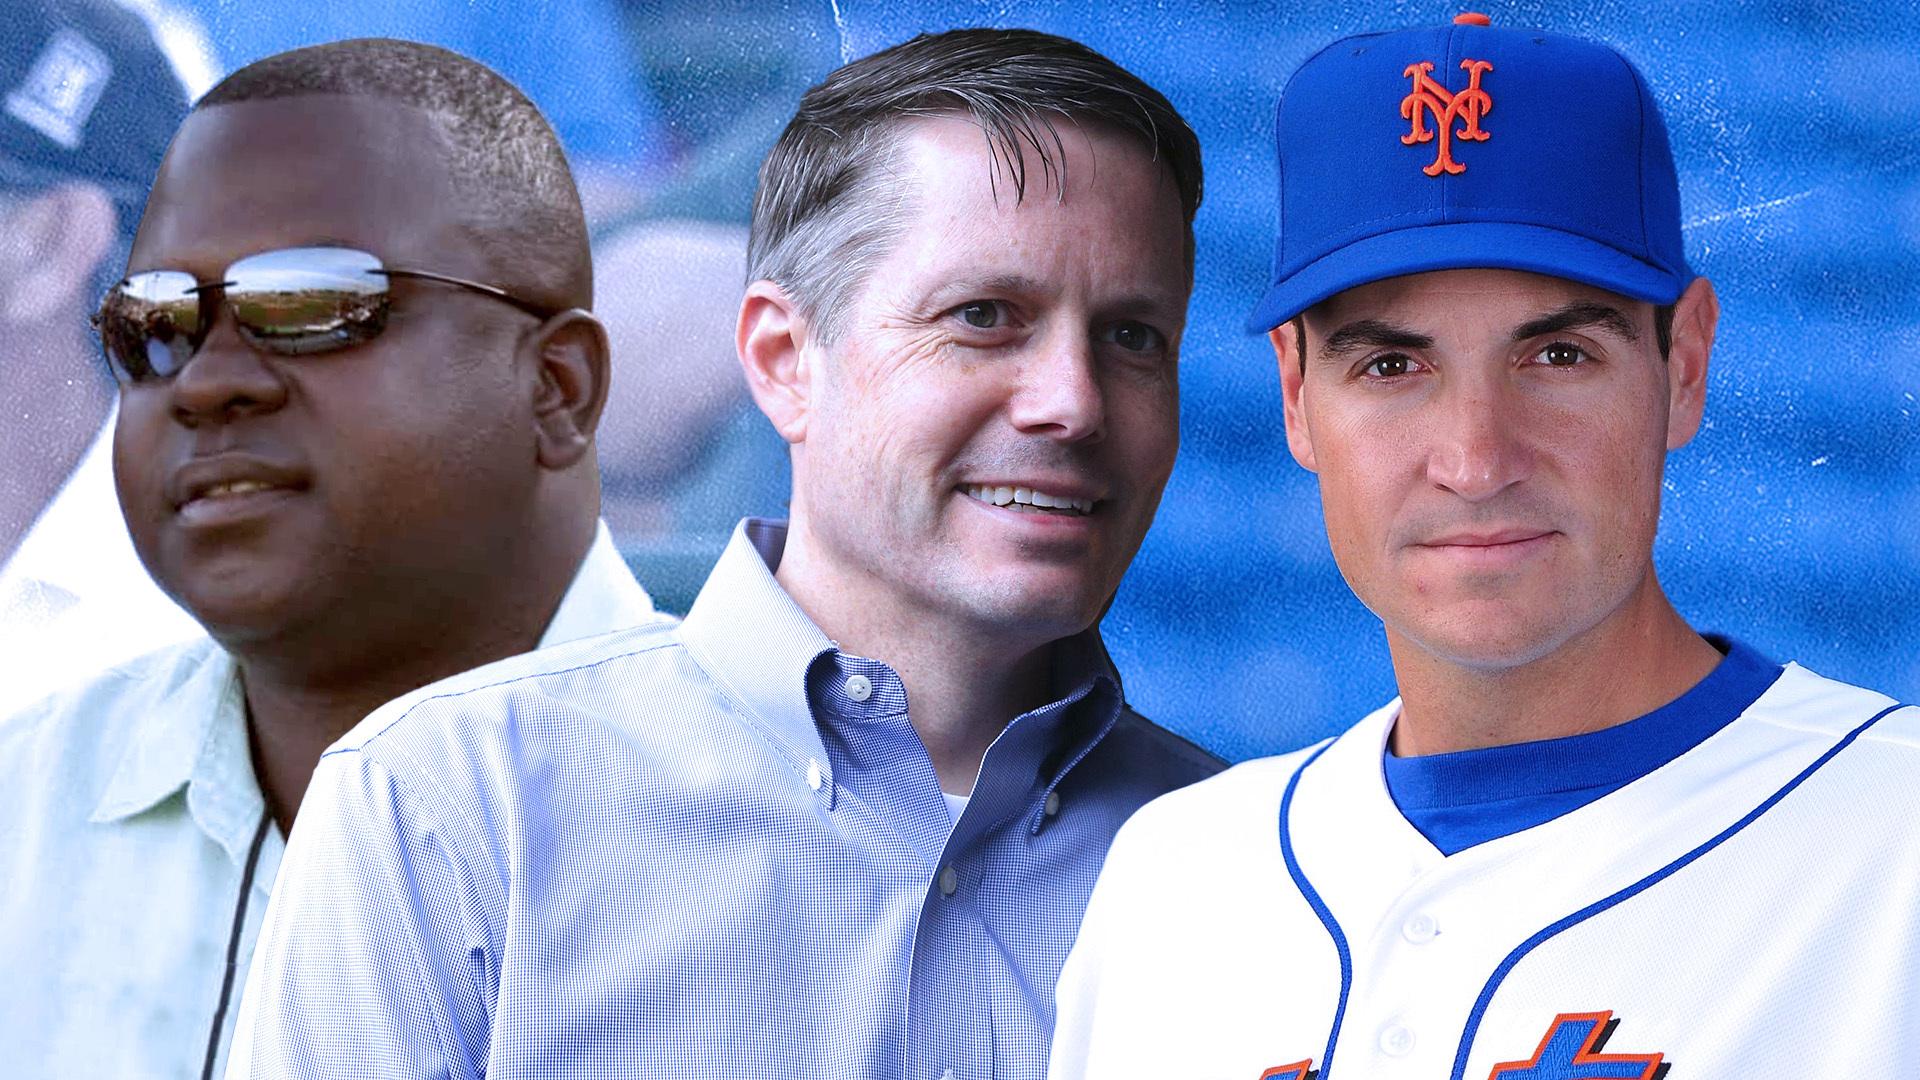 Billy Owens, John Ricco and Chris Young / SNY Treated Image